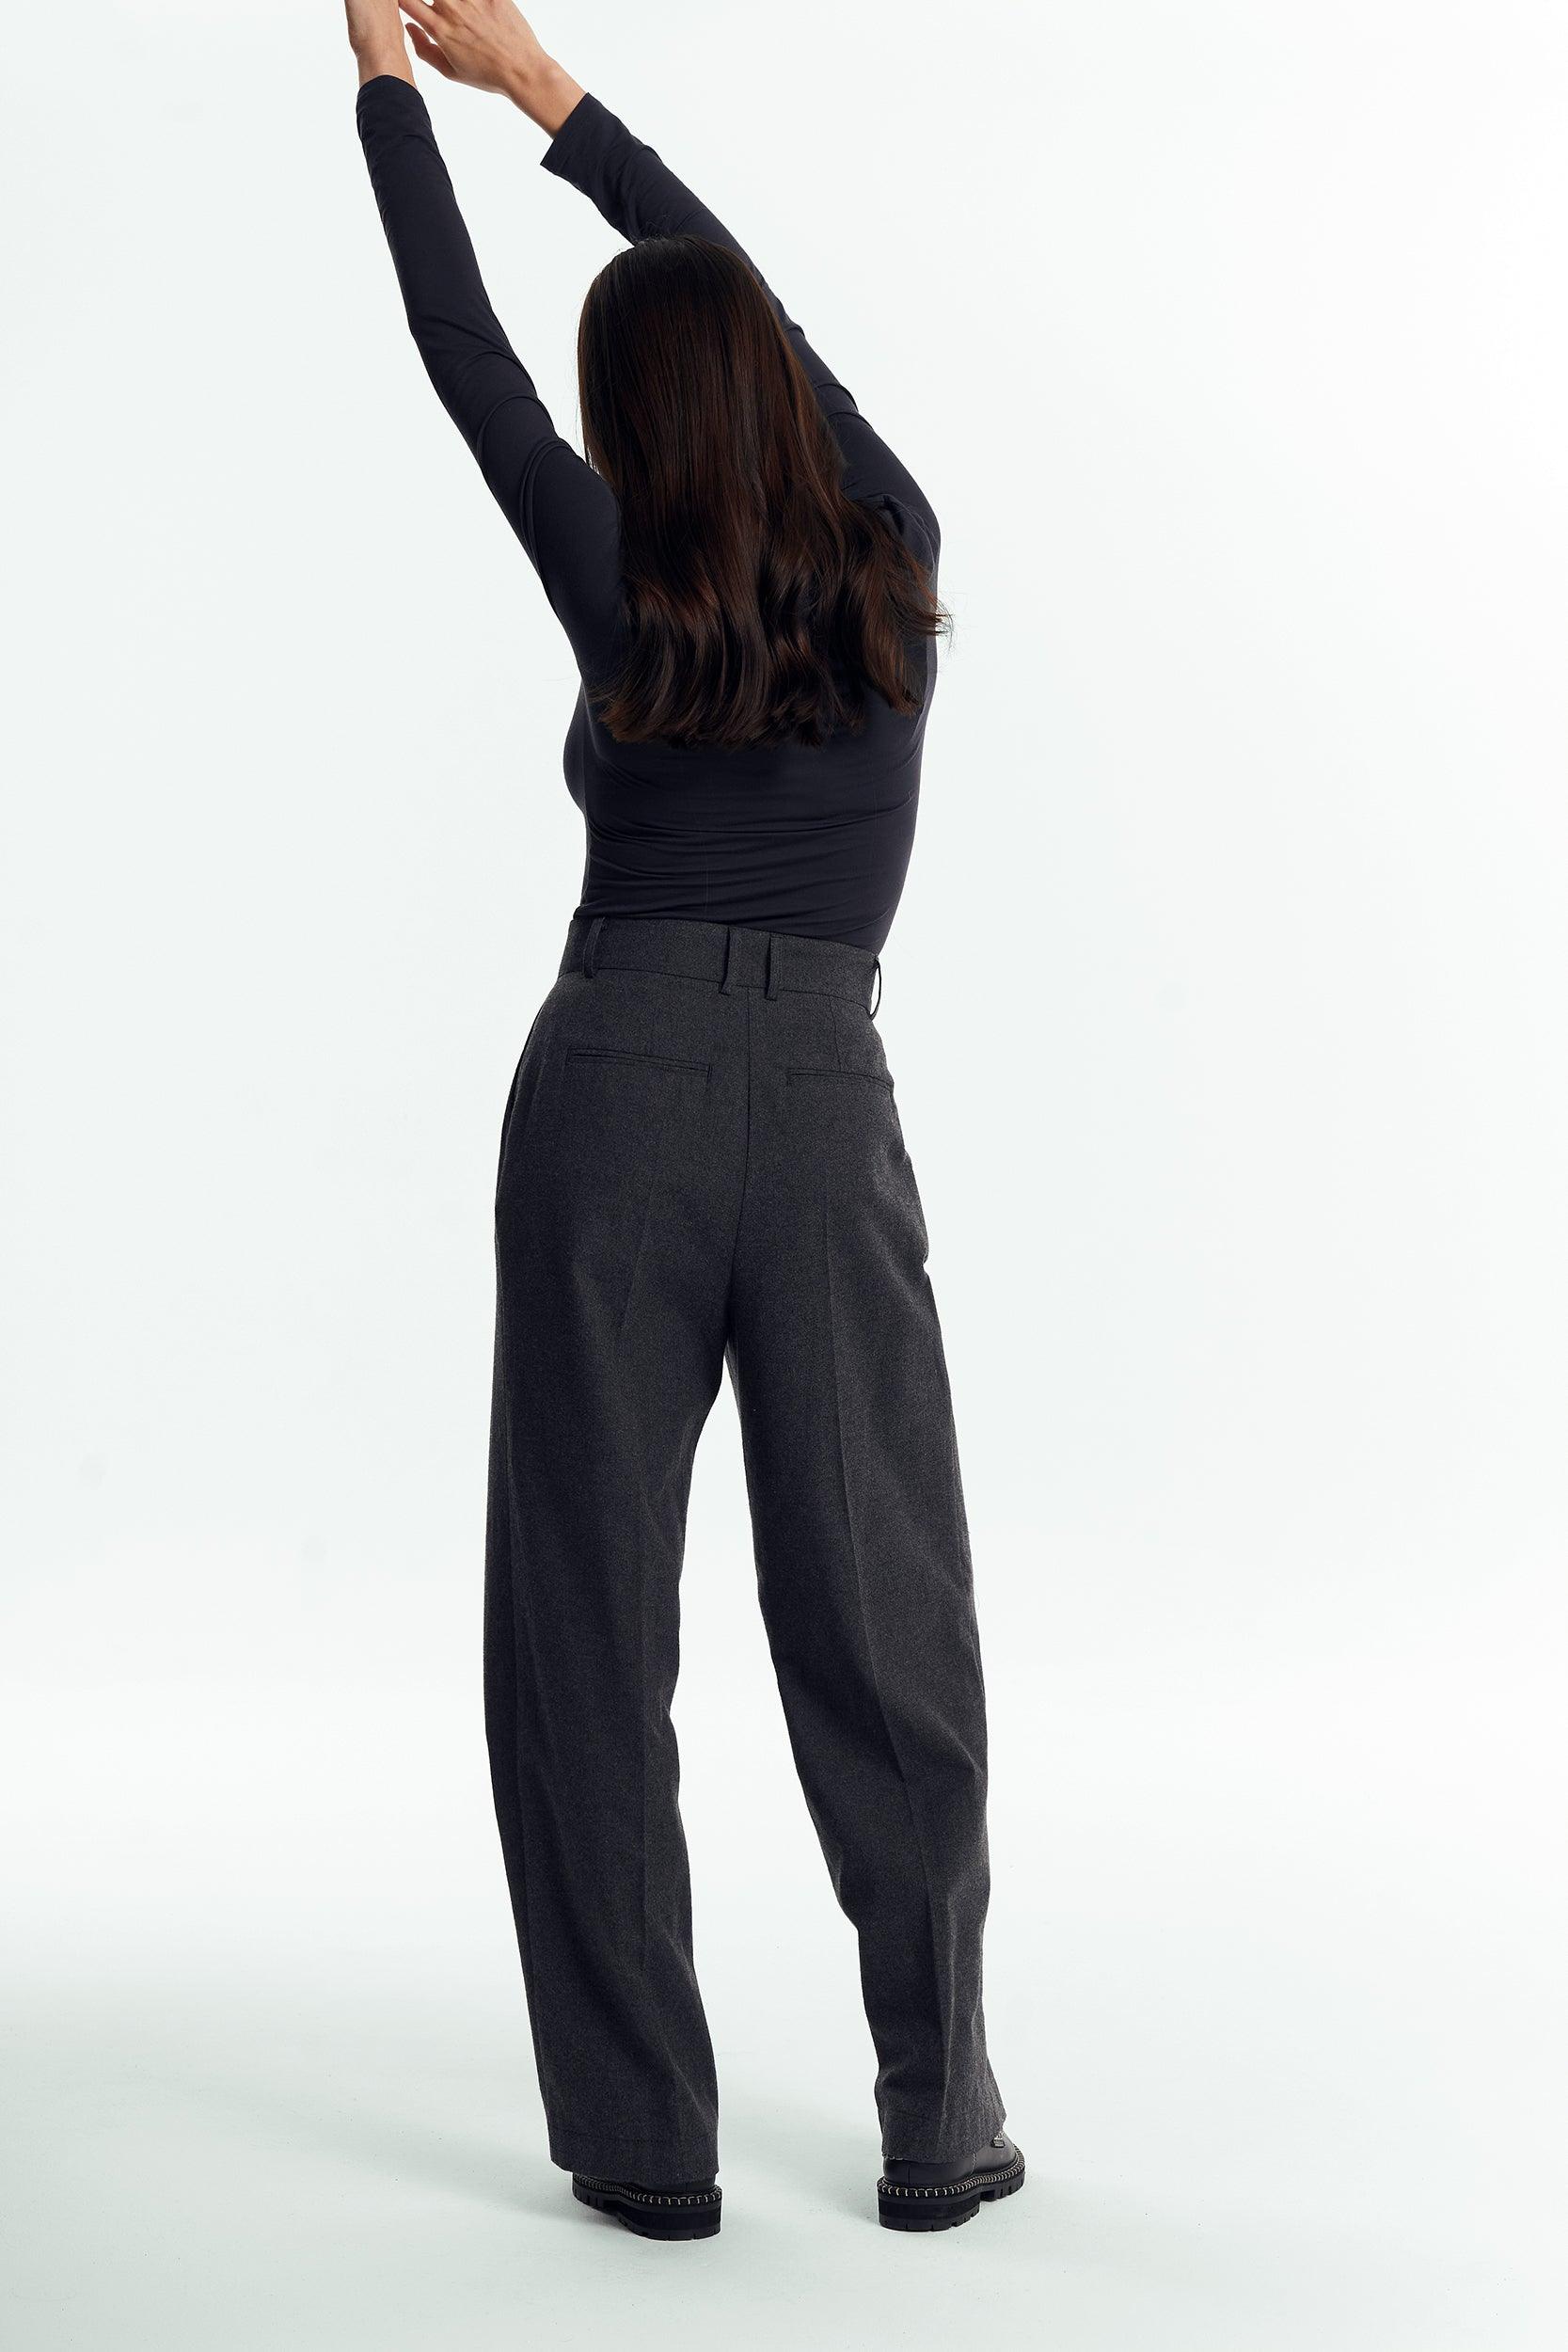 Modest Graphite trousers